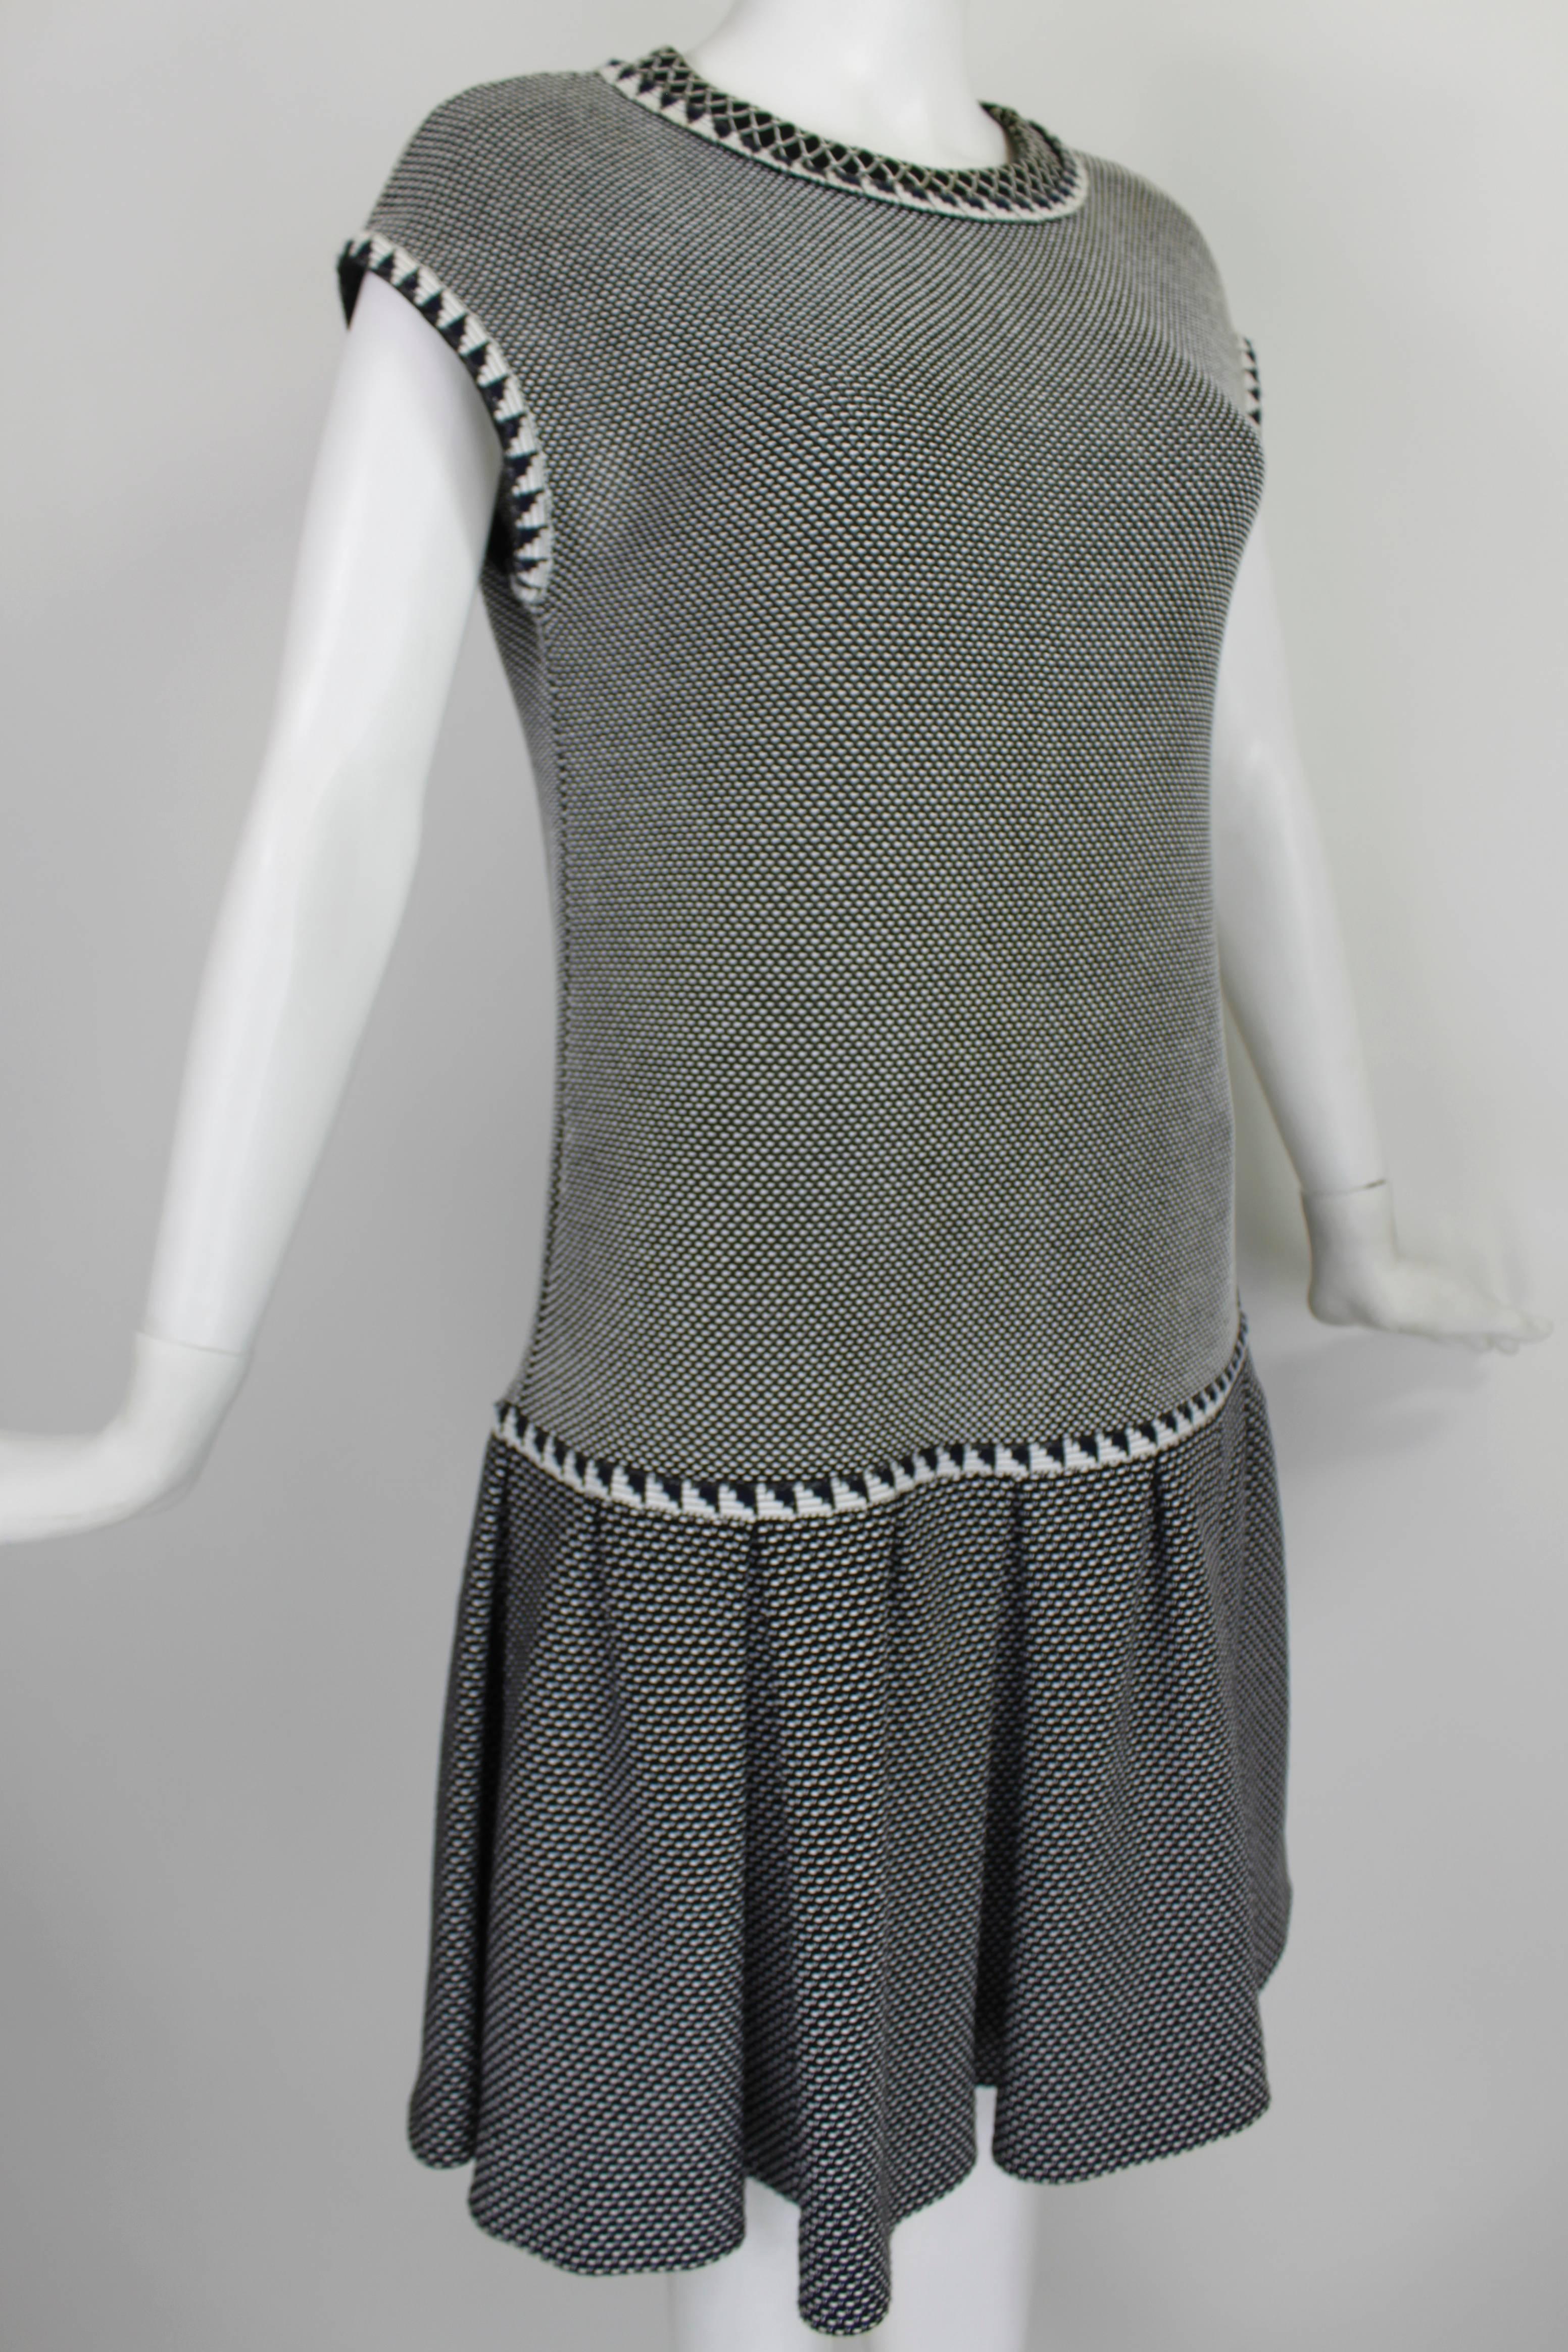 This fabulous knit dress from Chanel features a fine contrasting graphic op-art pattern. The trim around the neck, arm holes, and waistband have a black and white back-to-back triangle print, as well as intricately wrapped piping with dots of navy